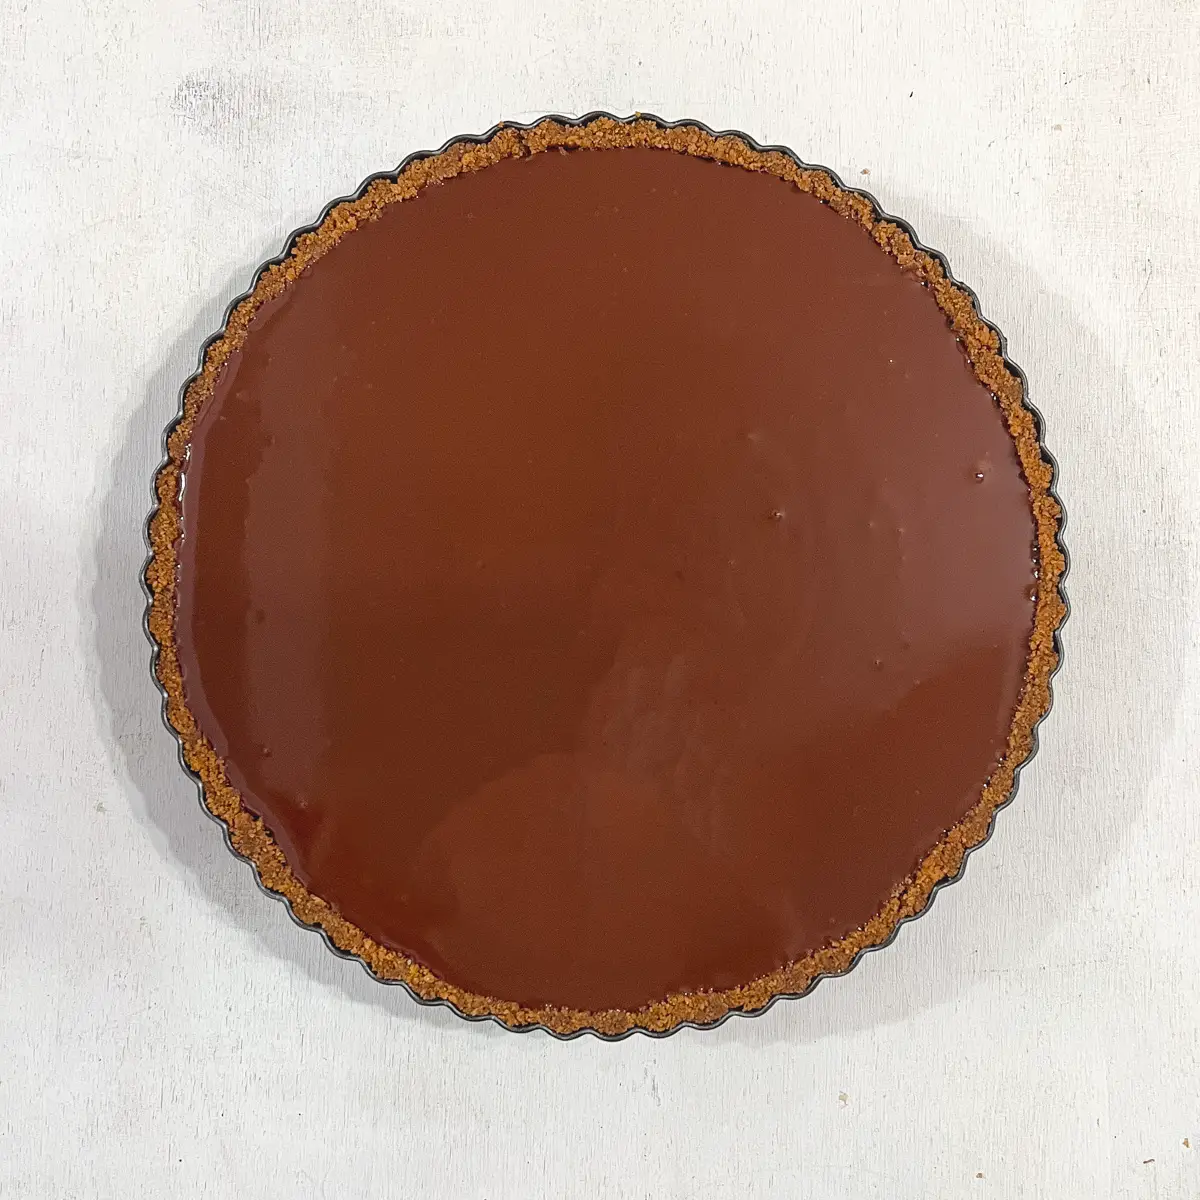 A vegan cookie crust tart filled with glossy chocolate ganache.